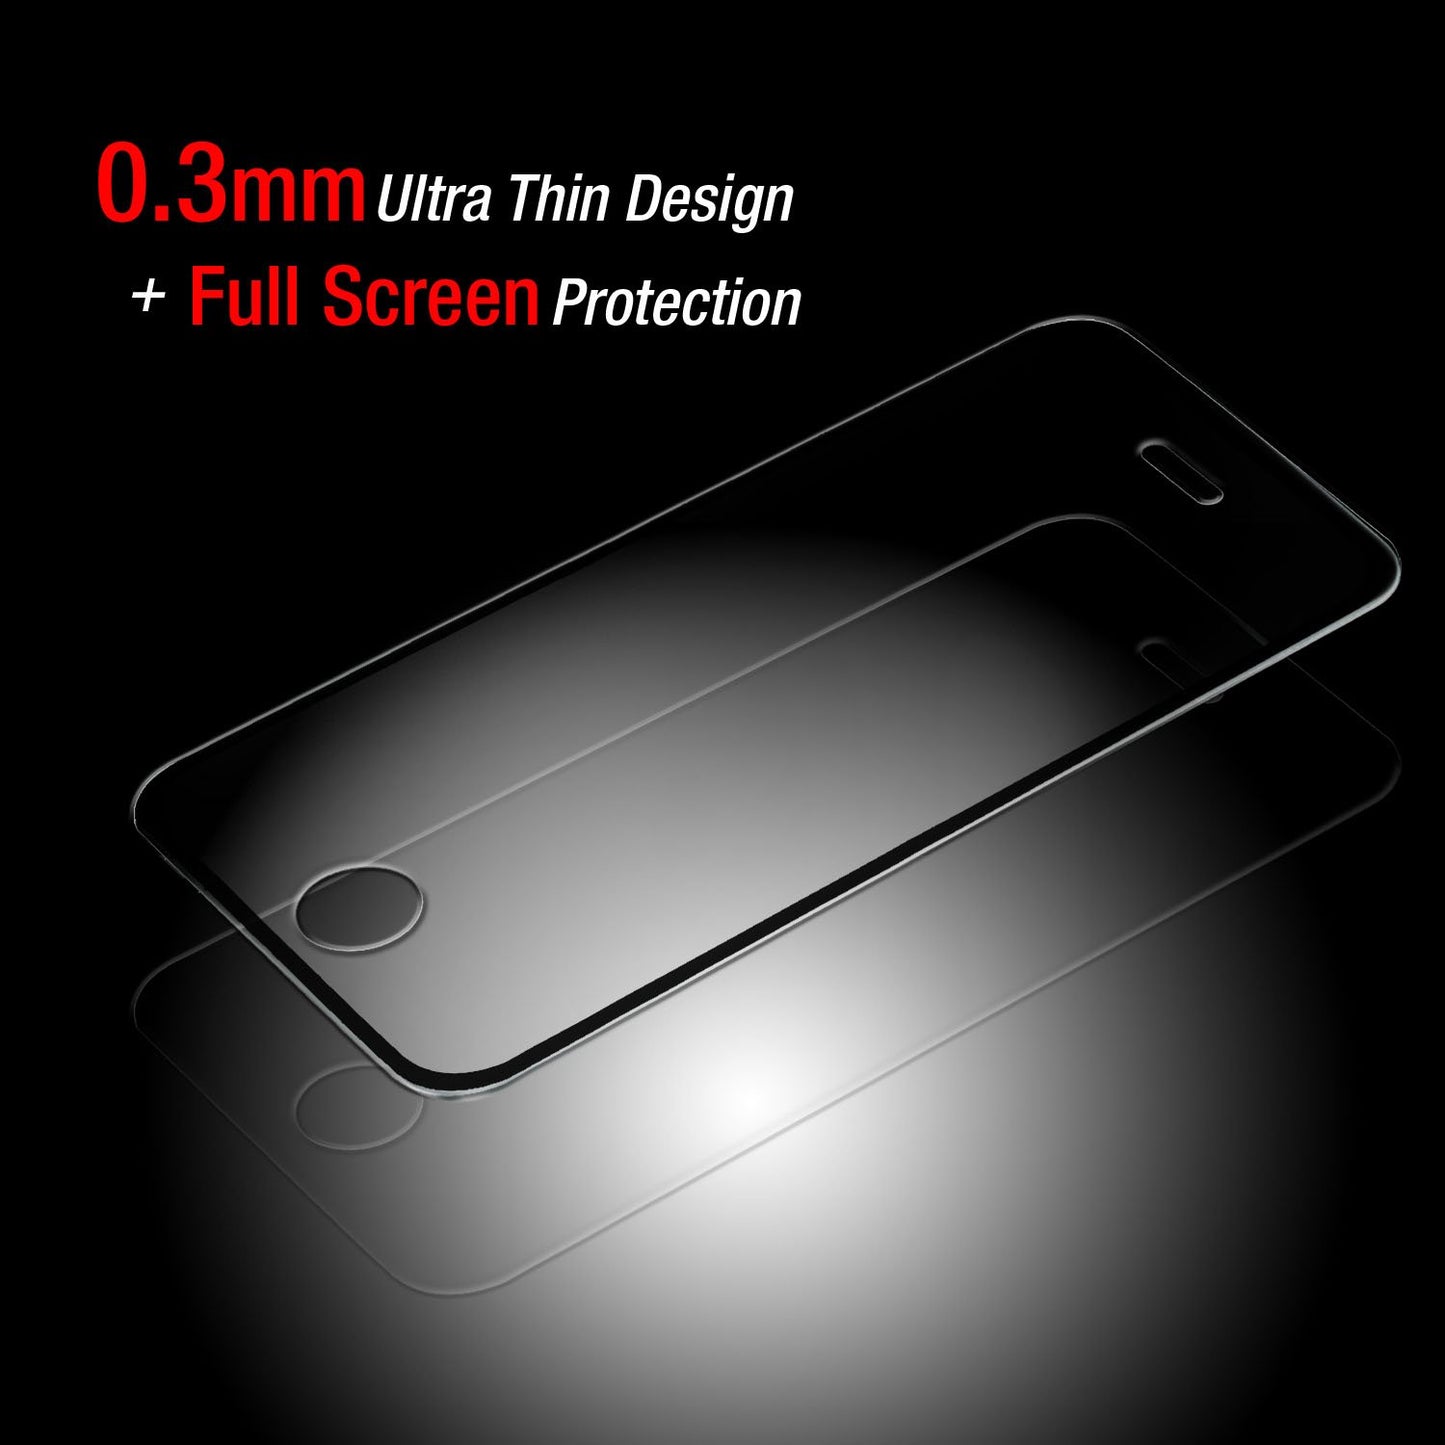 SGSAMS8PF - Premium Ultra-Thin Tempered Glass Screen Protector for Samsung Galaxy 8 Plus (0.3mm) by Cellet